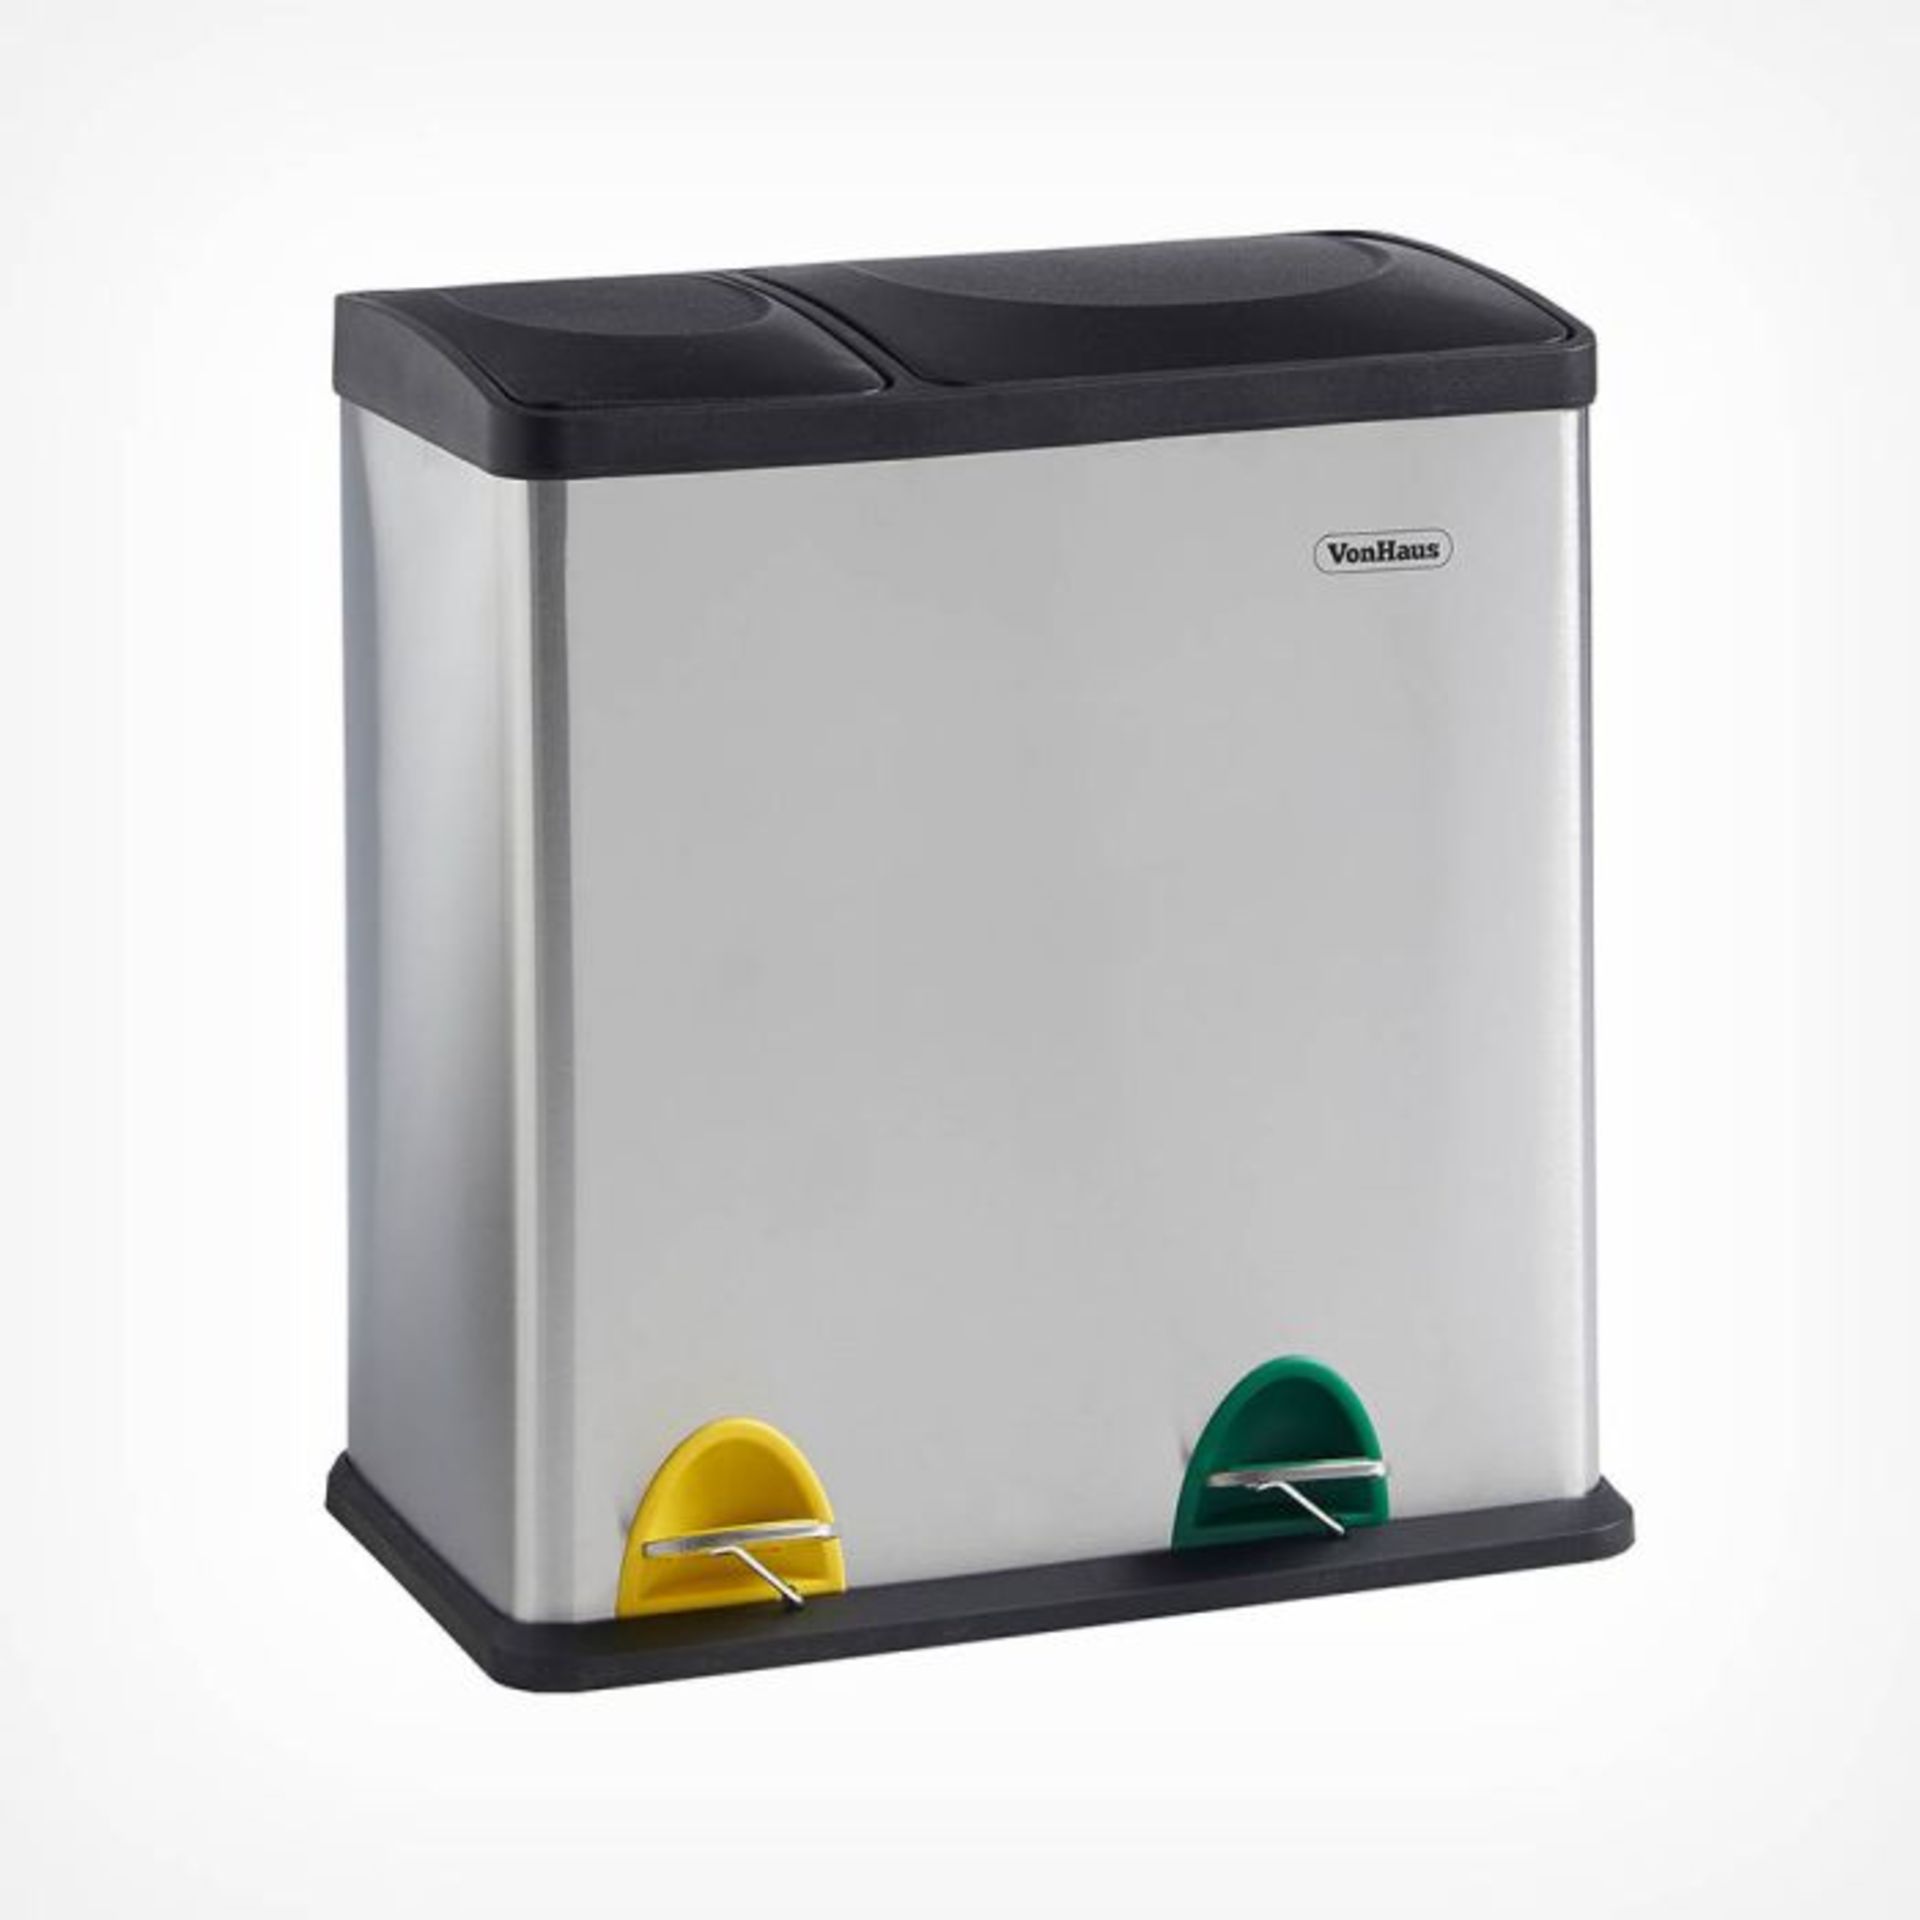 36L 2 in 1 Recycling Bin. - PW. The Luxury 36L 2 Compartment Recycling Bin makes disposing of